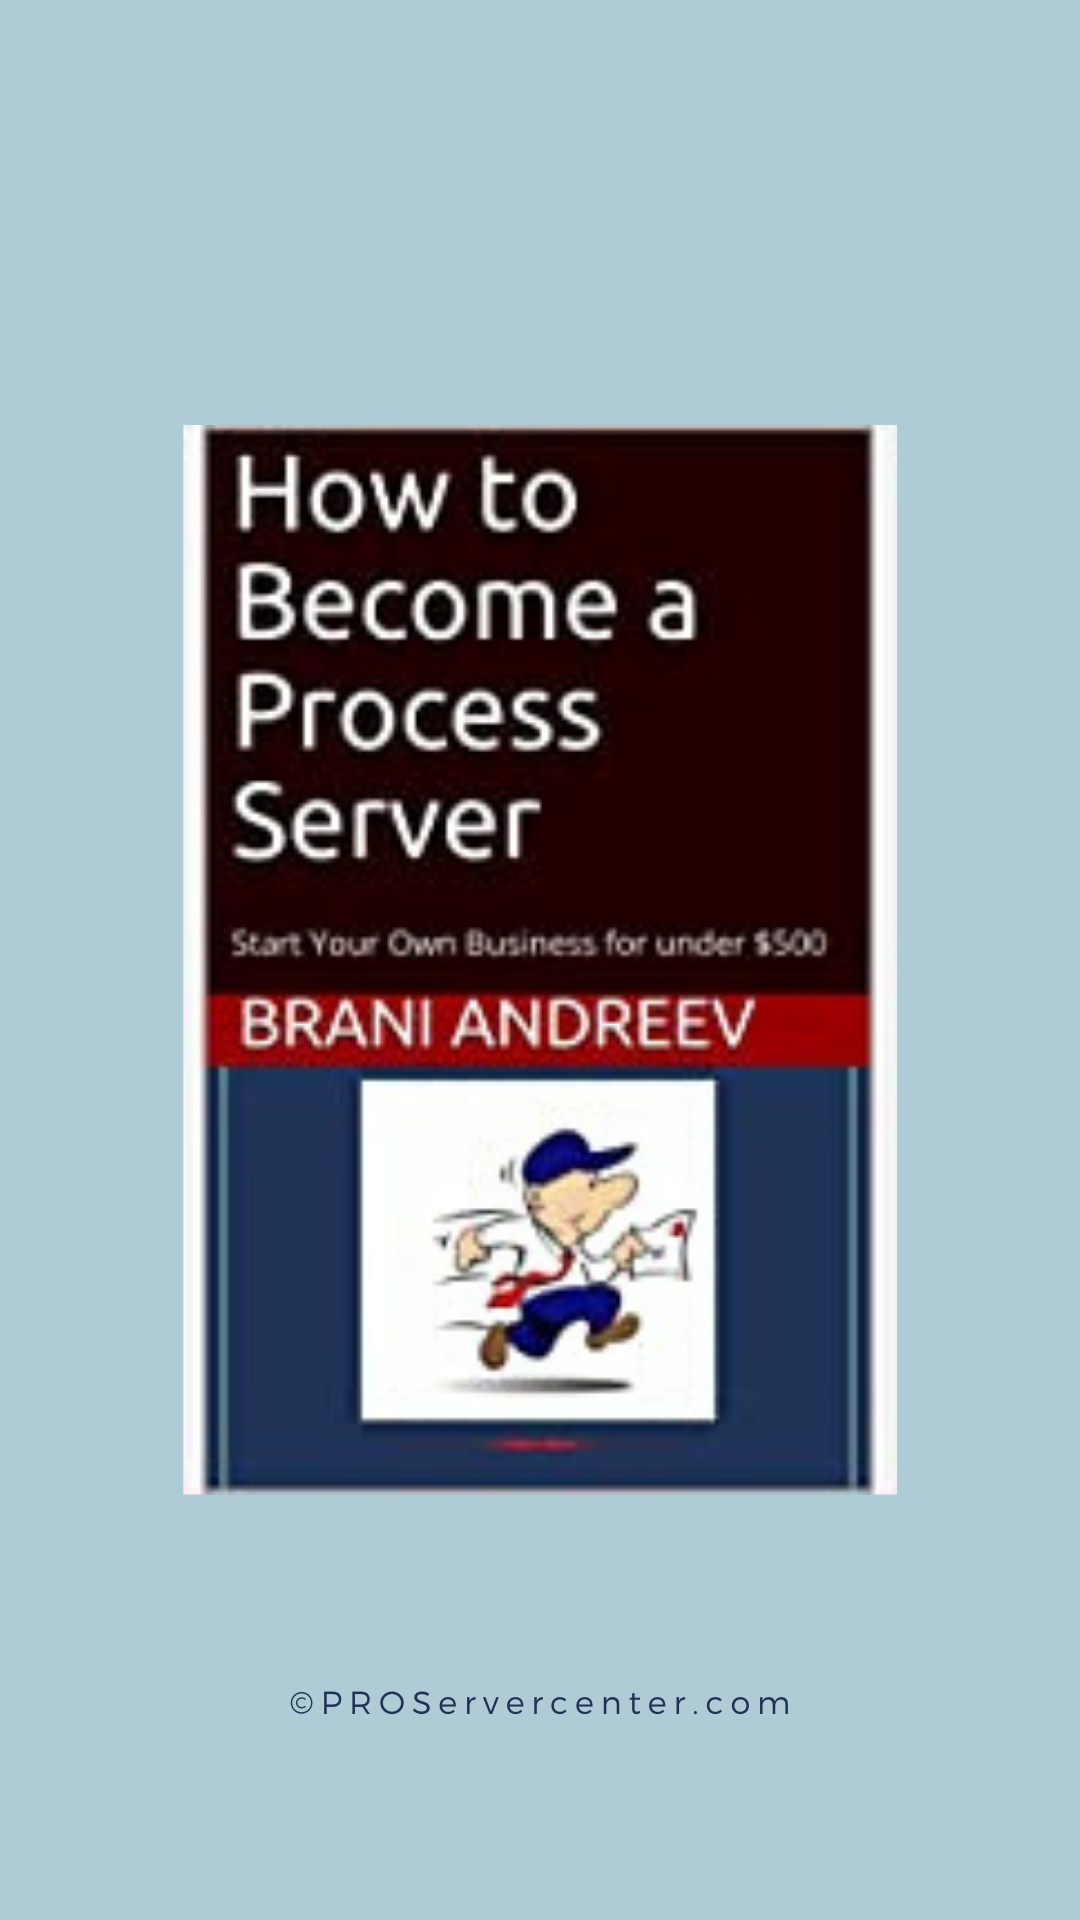 how to become a process server, amazon book